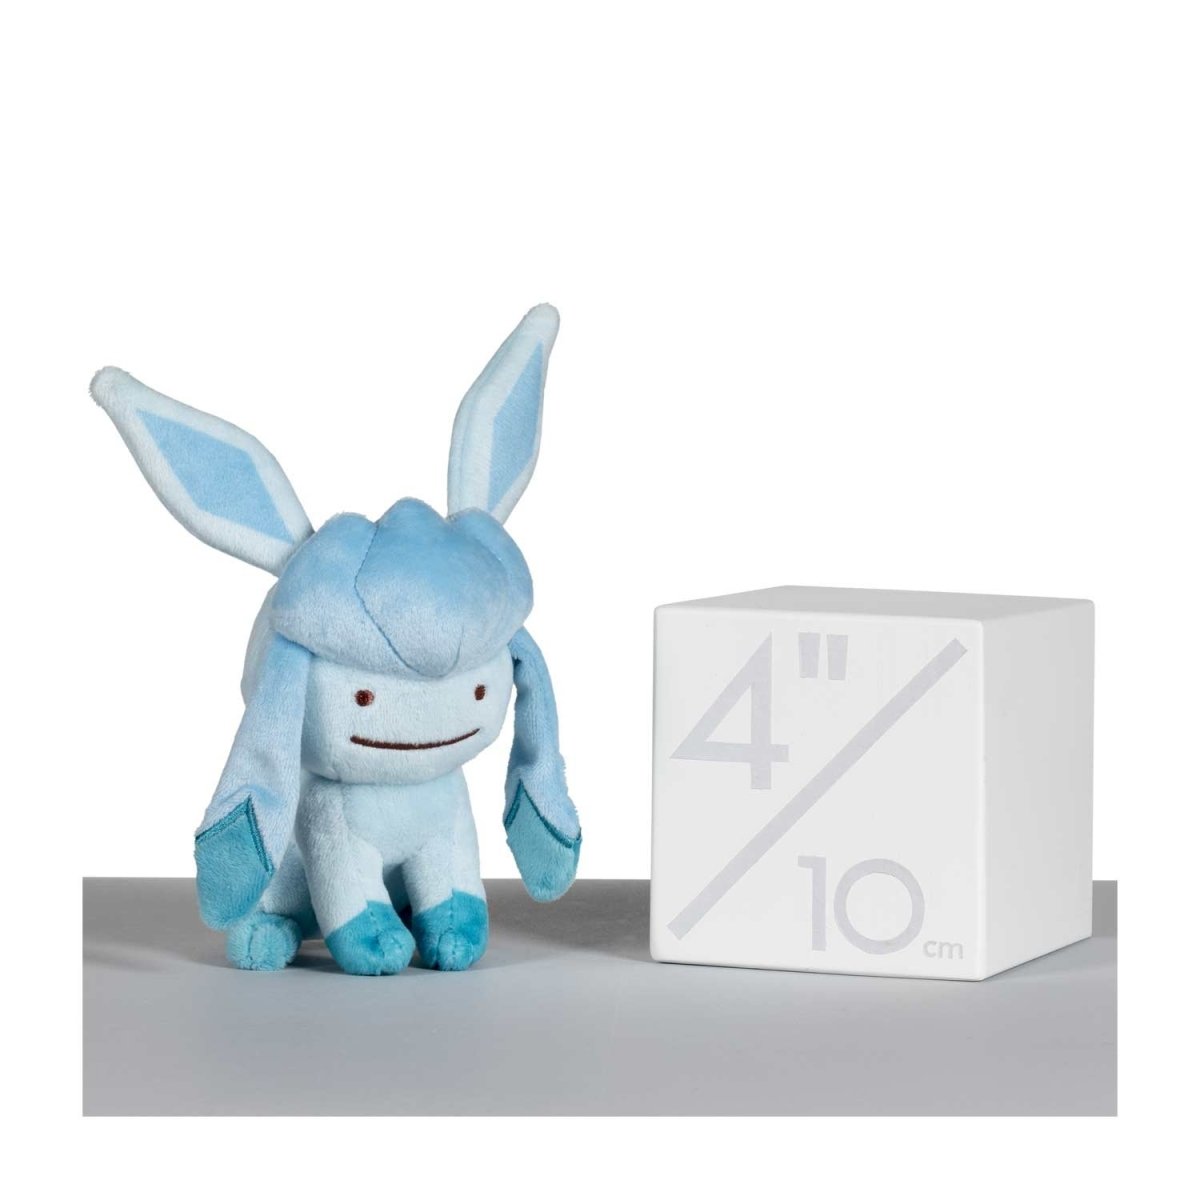 Ditto As Glaceon Plush - 8 In.